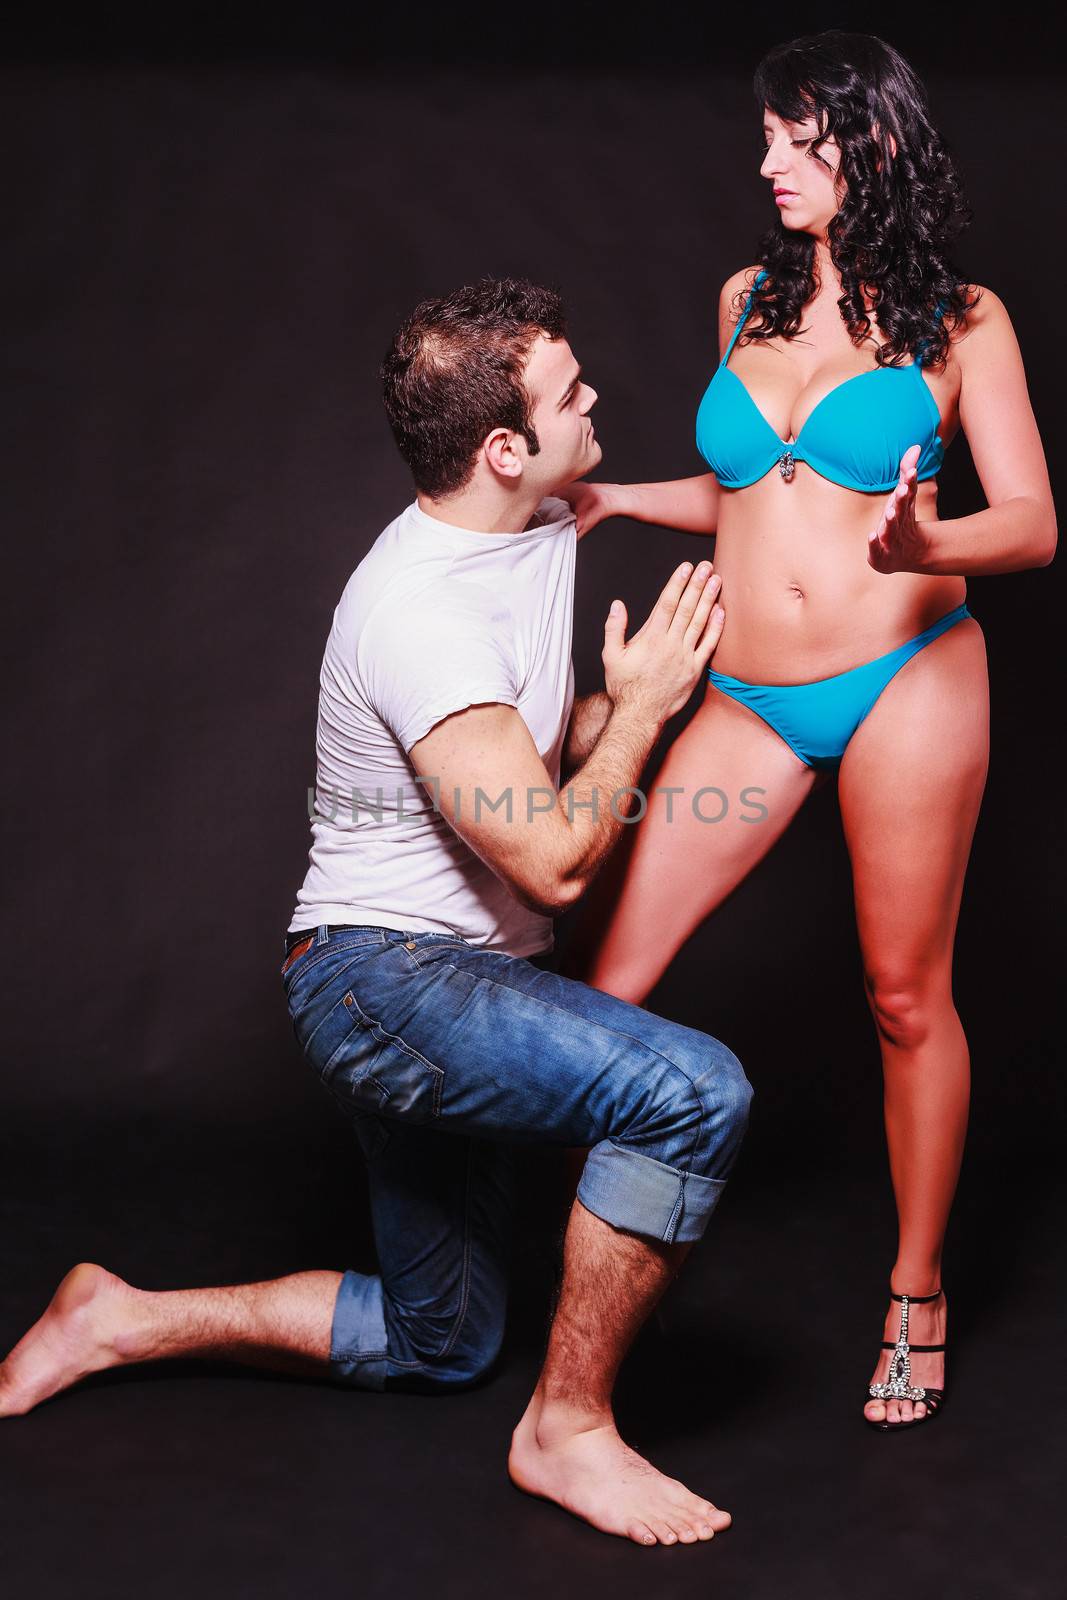 Young couple acting out sexual fantasies of dominance and subservience with the barefoot man kneeling at the womans feet as she stands in her lingerie gripping him by the shirt